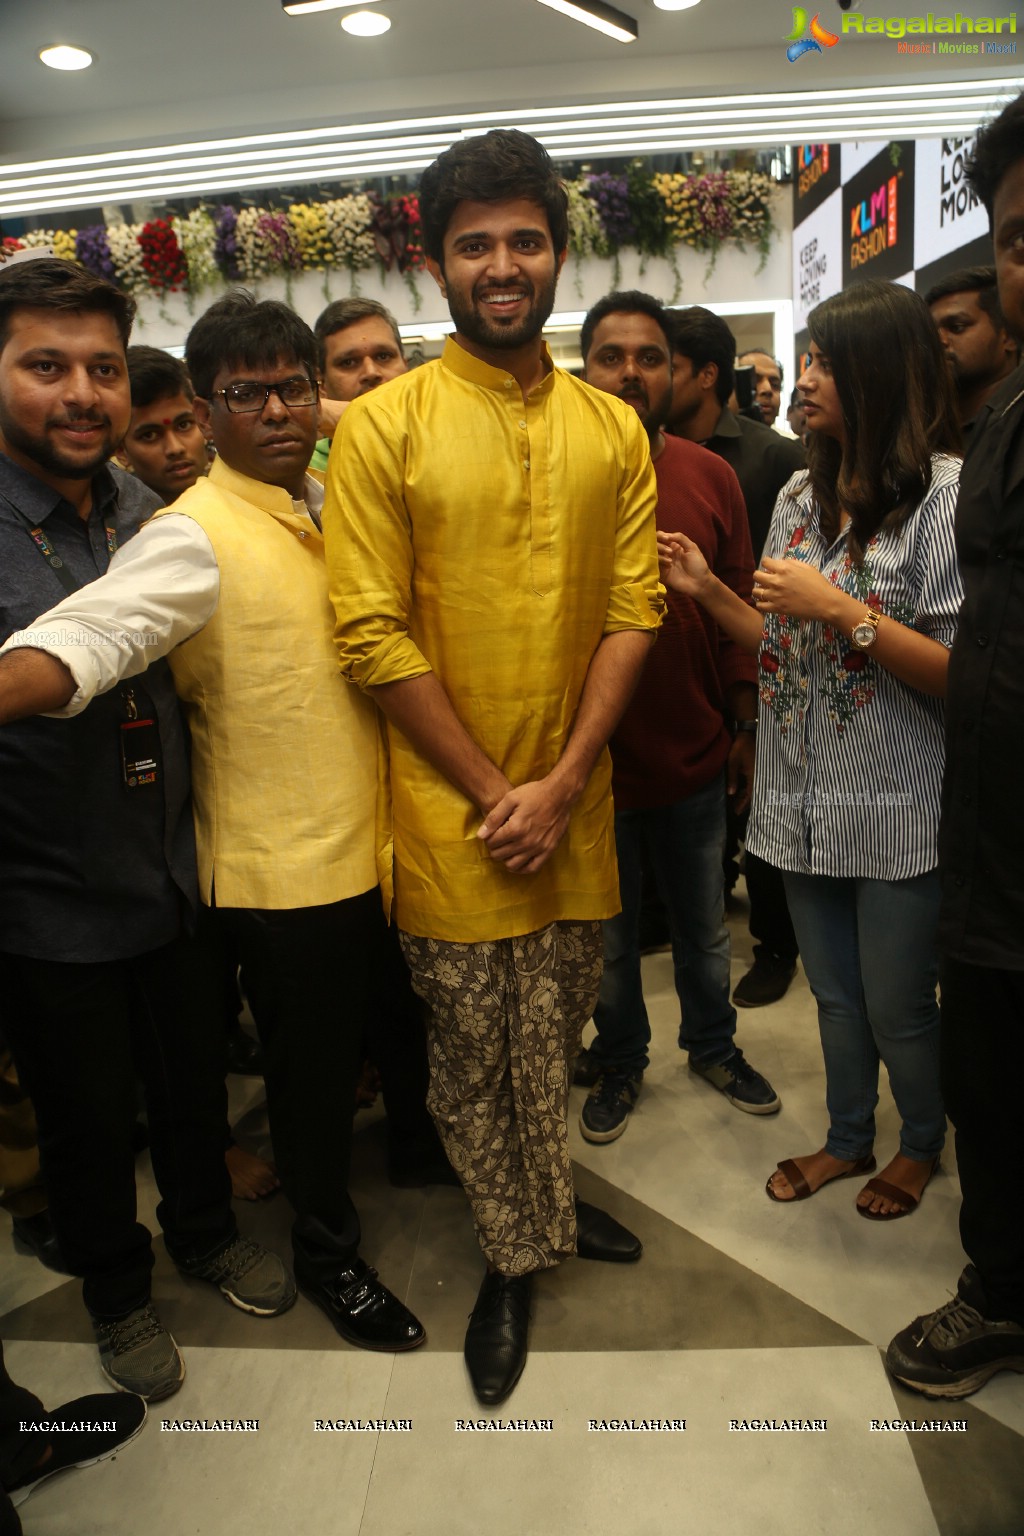 Grand Launch of KLM Fashion Mall at Ameerpet